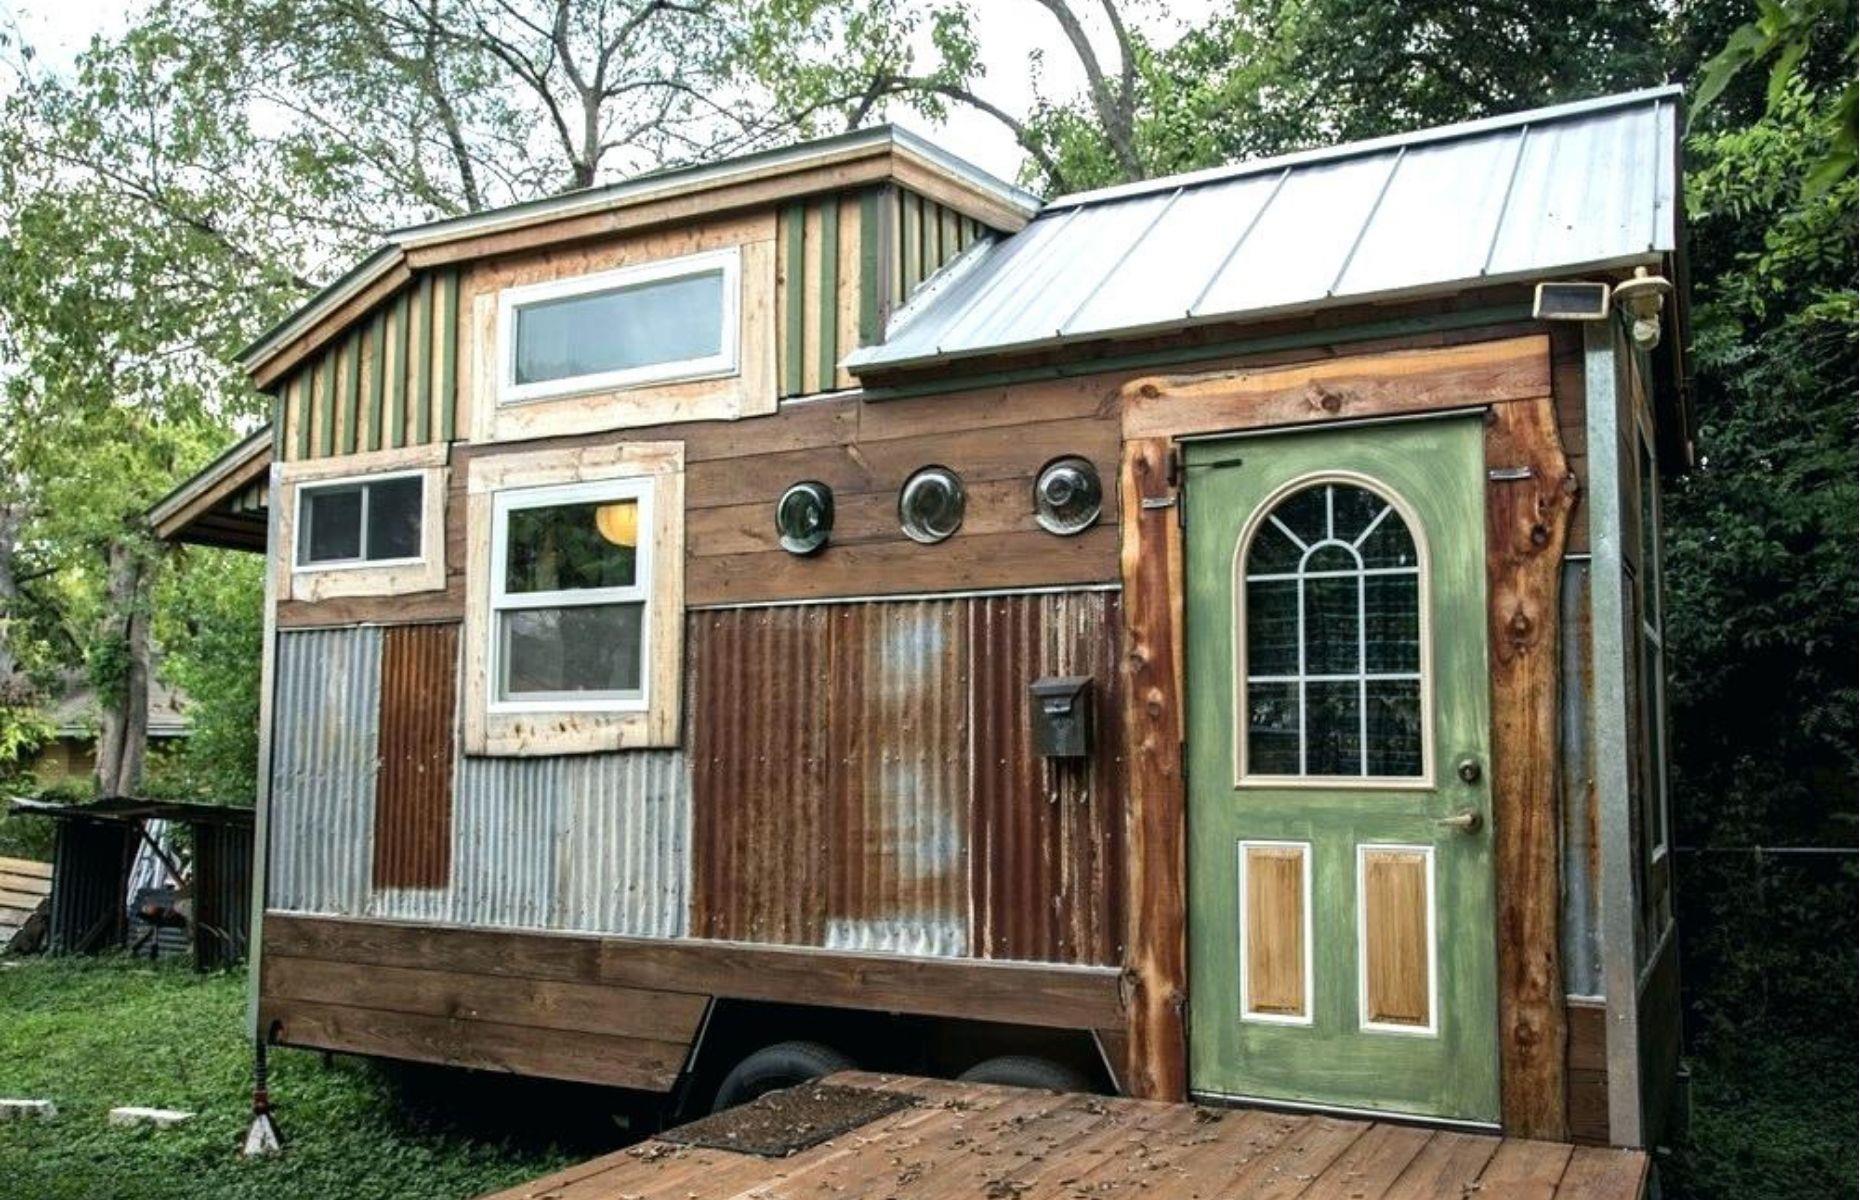 <p>This 200-square-foot micro-dwelling sits on wheels and lies in Austin, Texas. The rustic pad recently sold with <a href="https://www.tinyhomebuilders.com/tiny-house-marketplace/cedar-haven-spacious-200sf-tiny-home-for-sale">Tiny Home Builders</a> for $31,000, even though it was created from locally sourced, reclaimed materials, meaning the original owner probably made a rather nice return on his initial investment.</p>